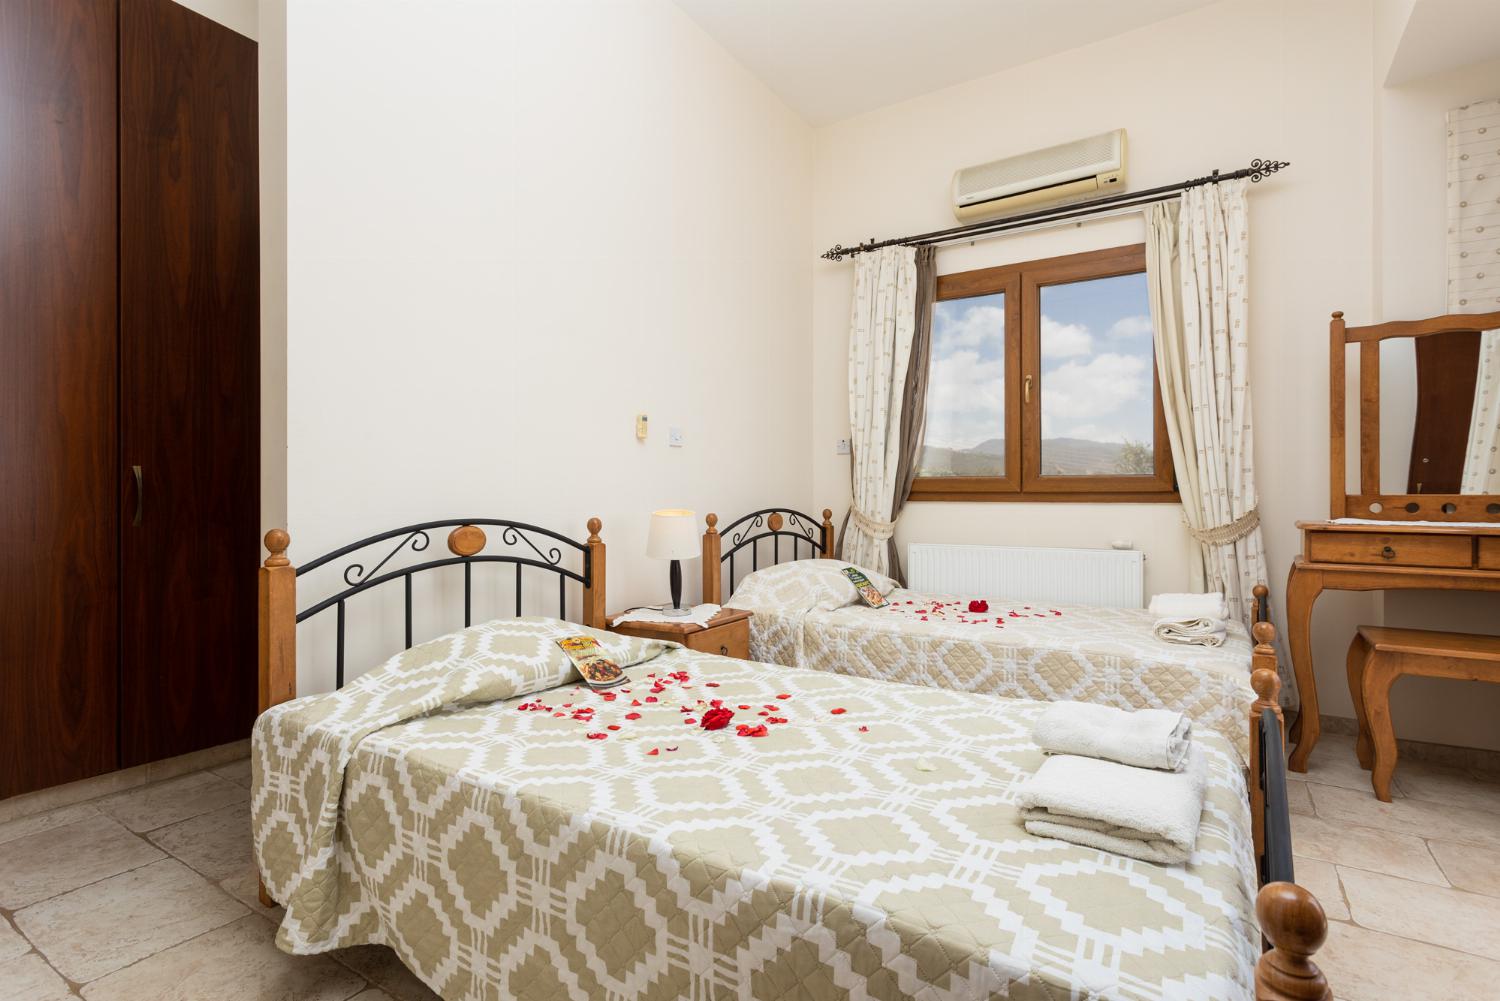 Twin bedroom on first floor with en suite bathroom, A/C, sea views, and balcony access